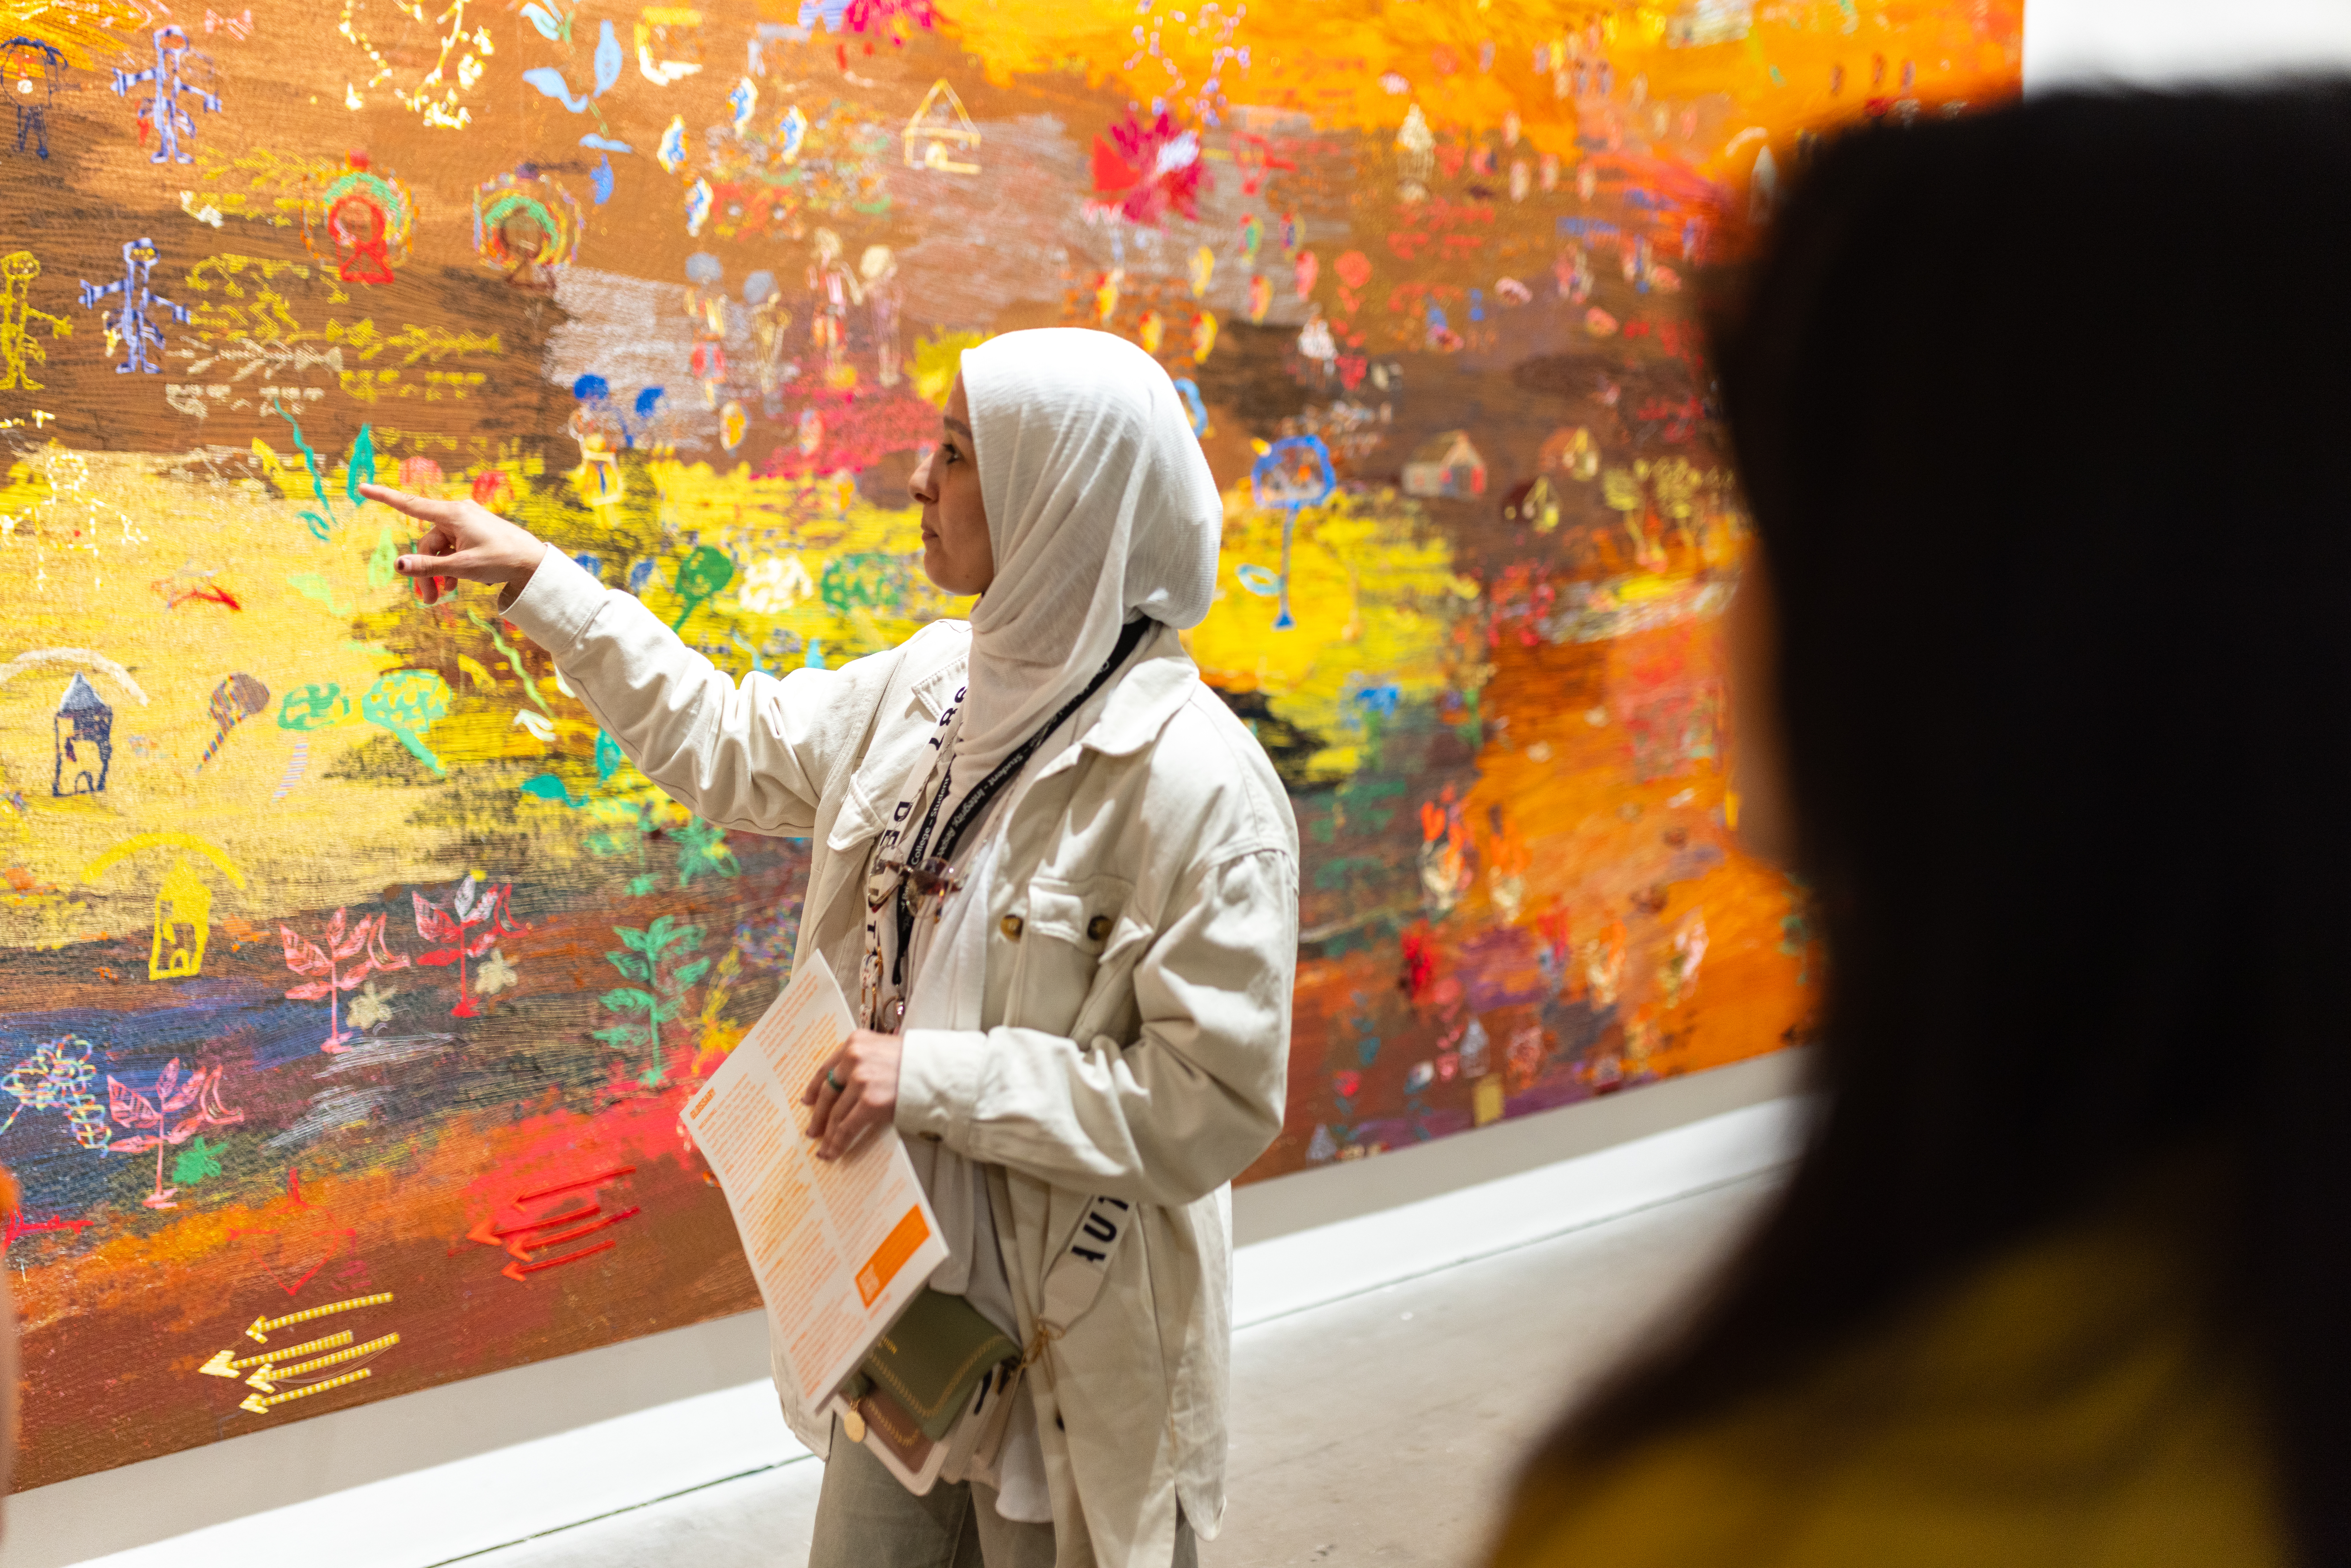 A woman dressed all in white with a white headscarf stands side on to a vibrant textile artwork on the wall. The textile work is a mixture of autumnal colours and heavily embroidered. She is pointing at the work.